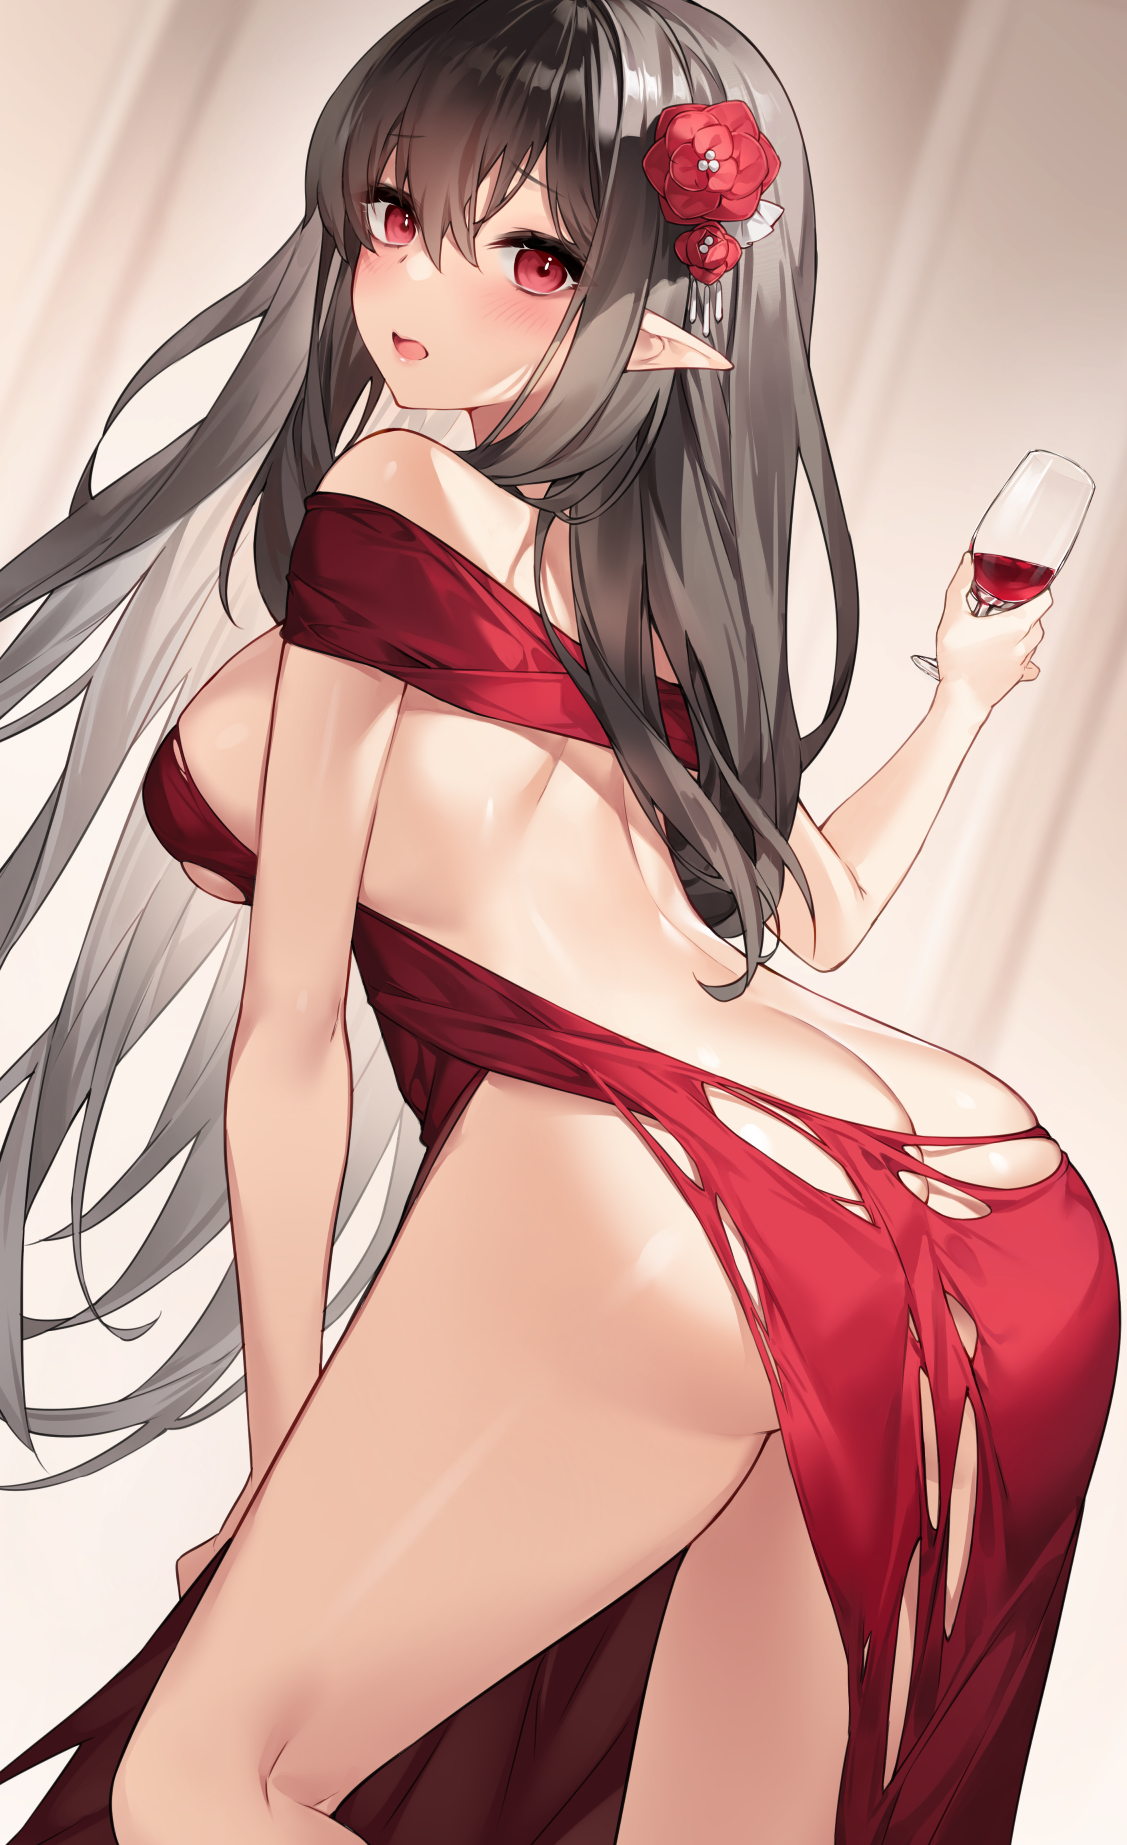 Anime 1127x1845 anime anime girls digital art artwork 2D portrait display bent over skinny red eyes pointy ears no bra open mouth blushing partially clothed looking over shoulder black hair long hair back bareback thighs glutes torn clothes dress ass elves Sora72iro nopan